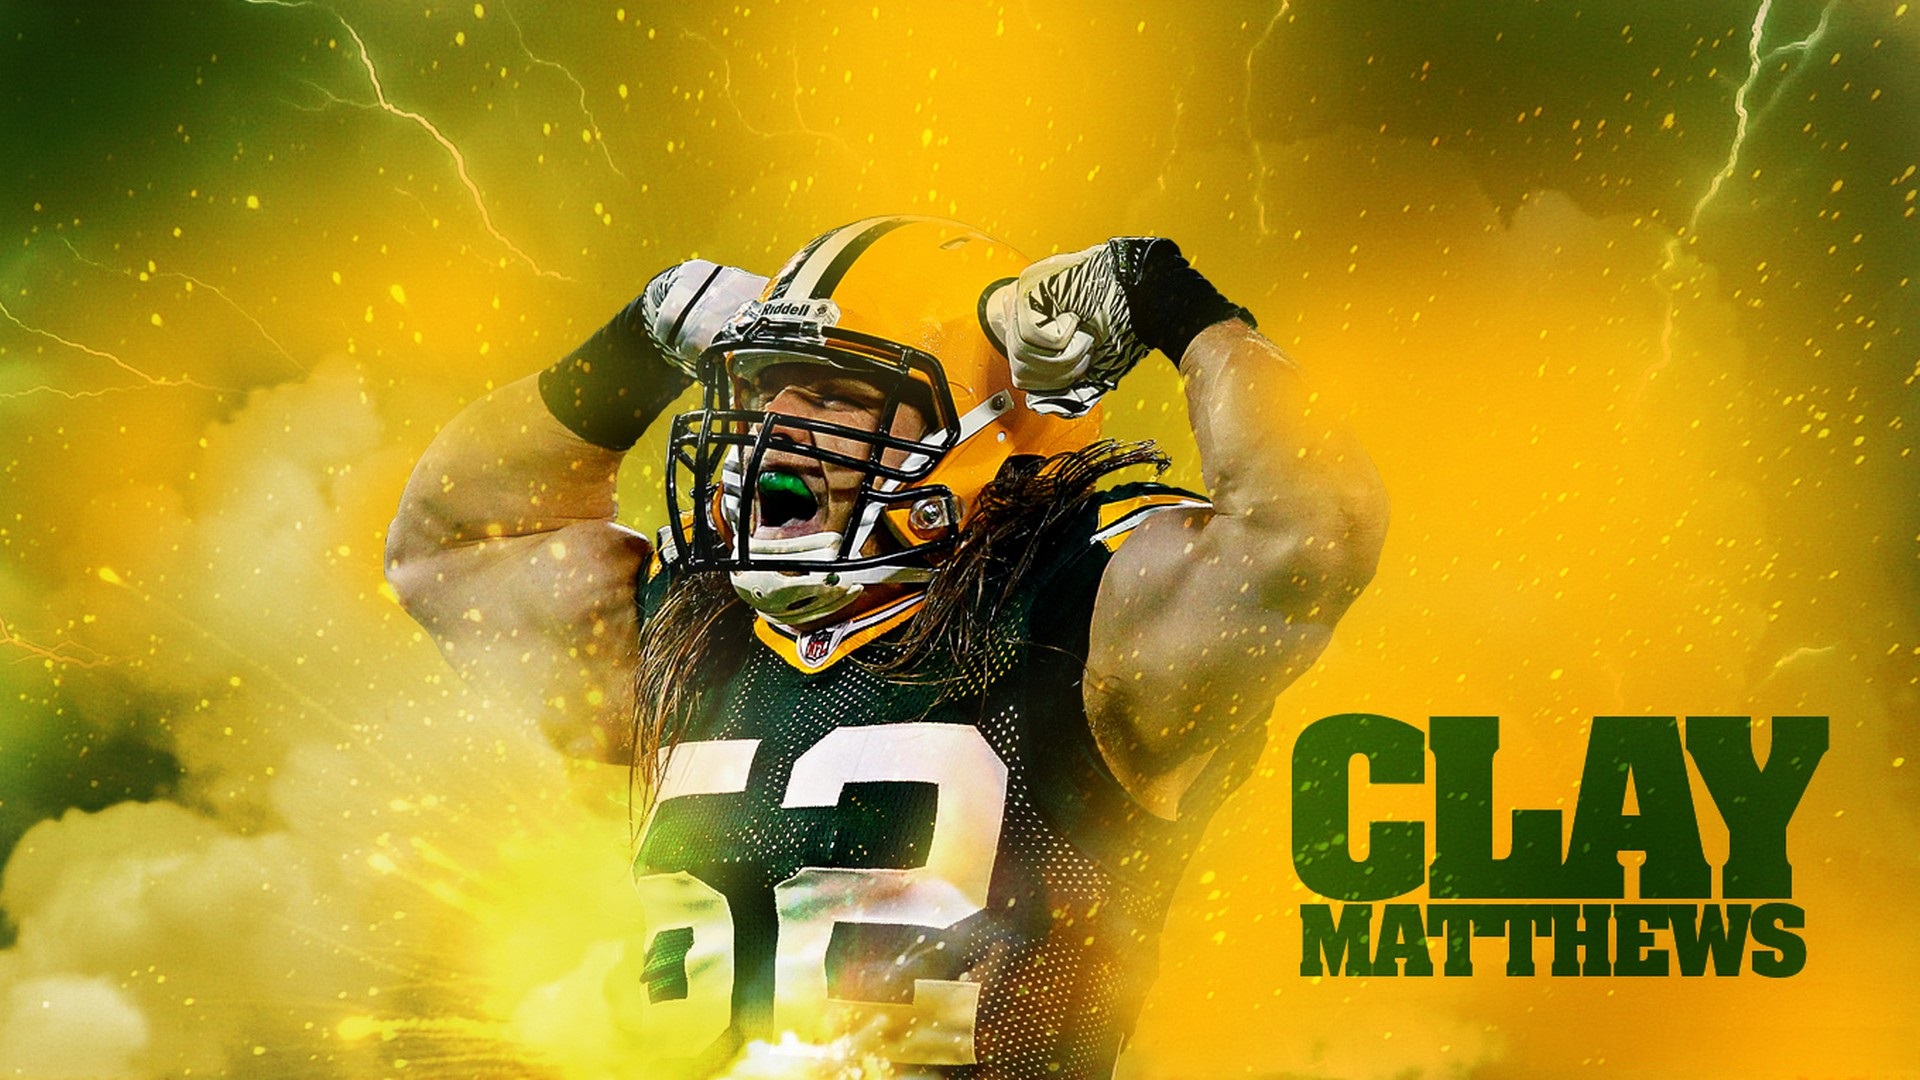 Green Bay Packers Laptop Wallpaper With high-resolution 1920X1080 pixel. Download and set as wallpaper for Desktop Computer, Apple iPhone X, XS Max, XR, 8, 7, 6, SE, iPad, Android